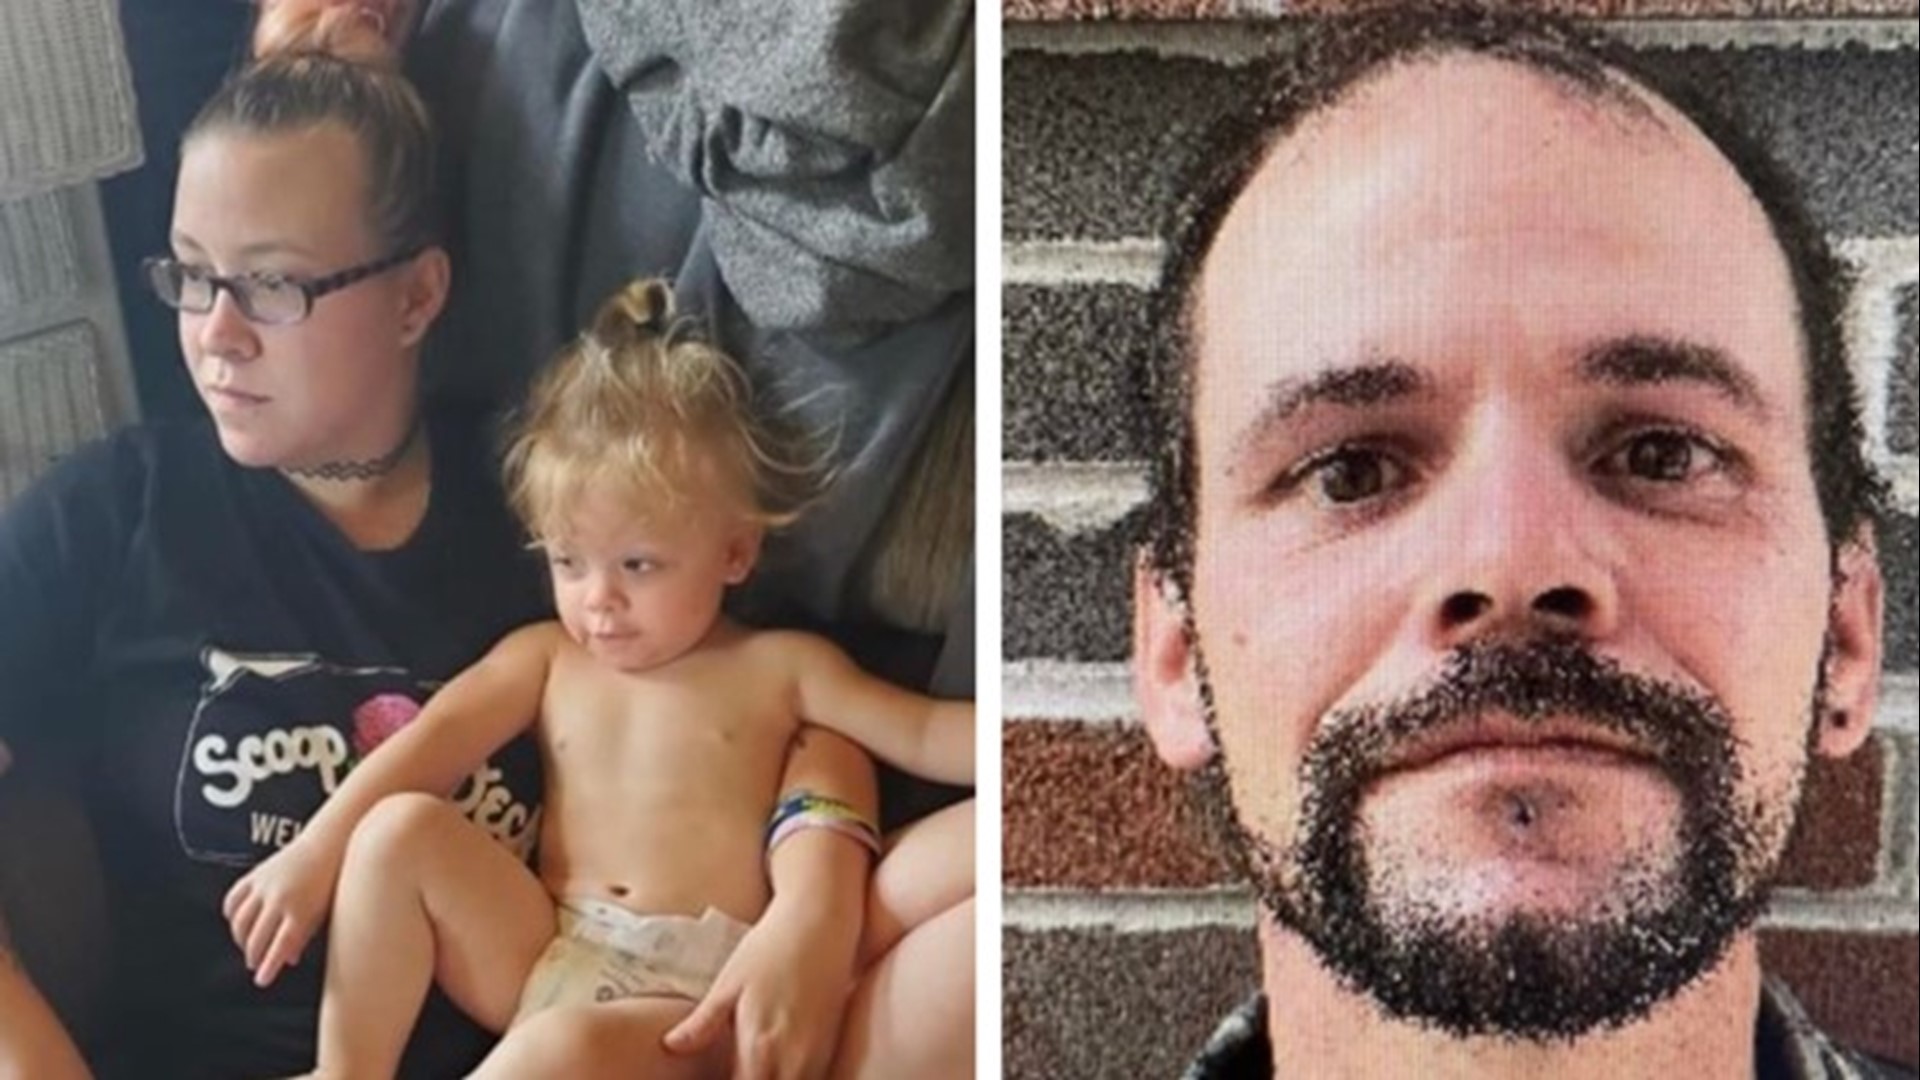 The two adults and their 2-year-old daughter had been missing since June 28, when they did not return from a camping trip.